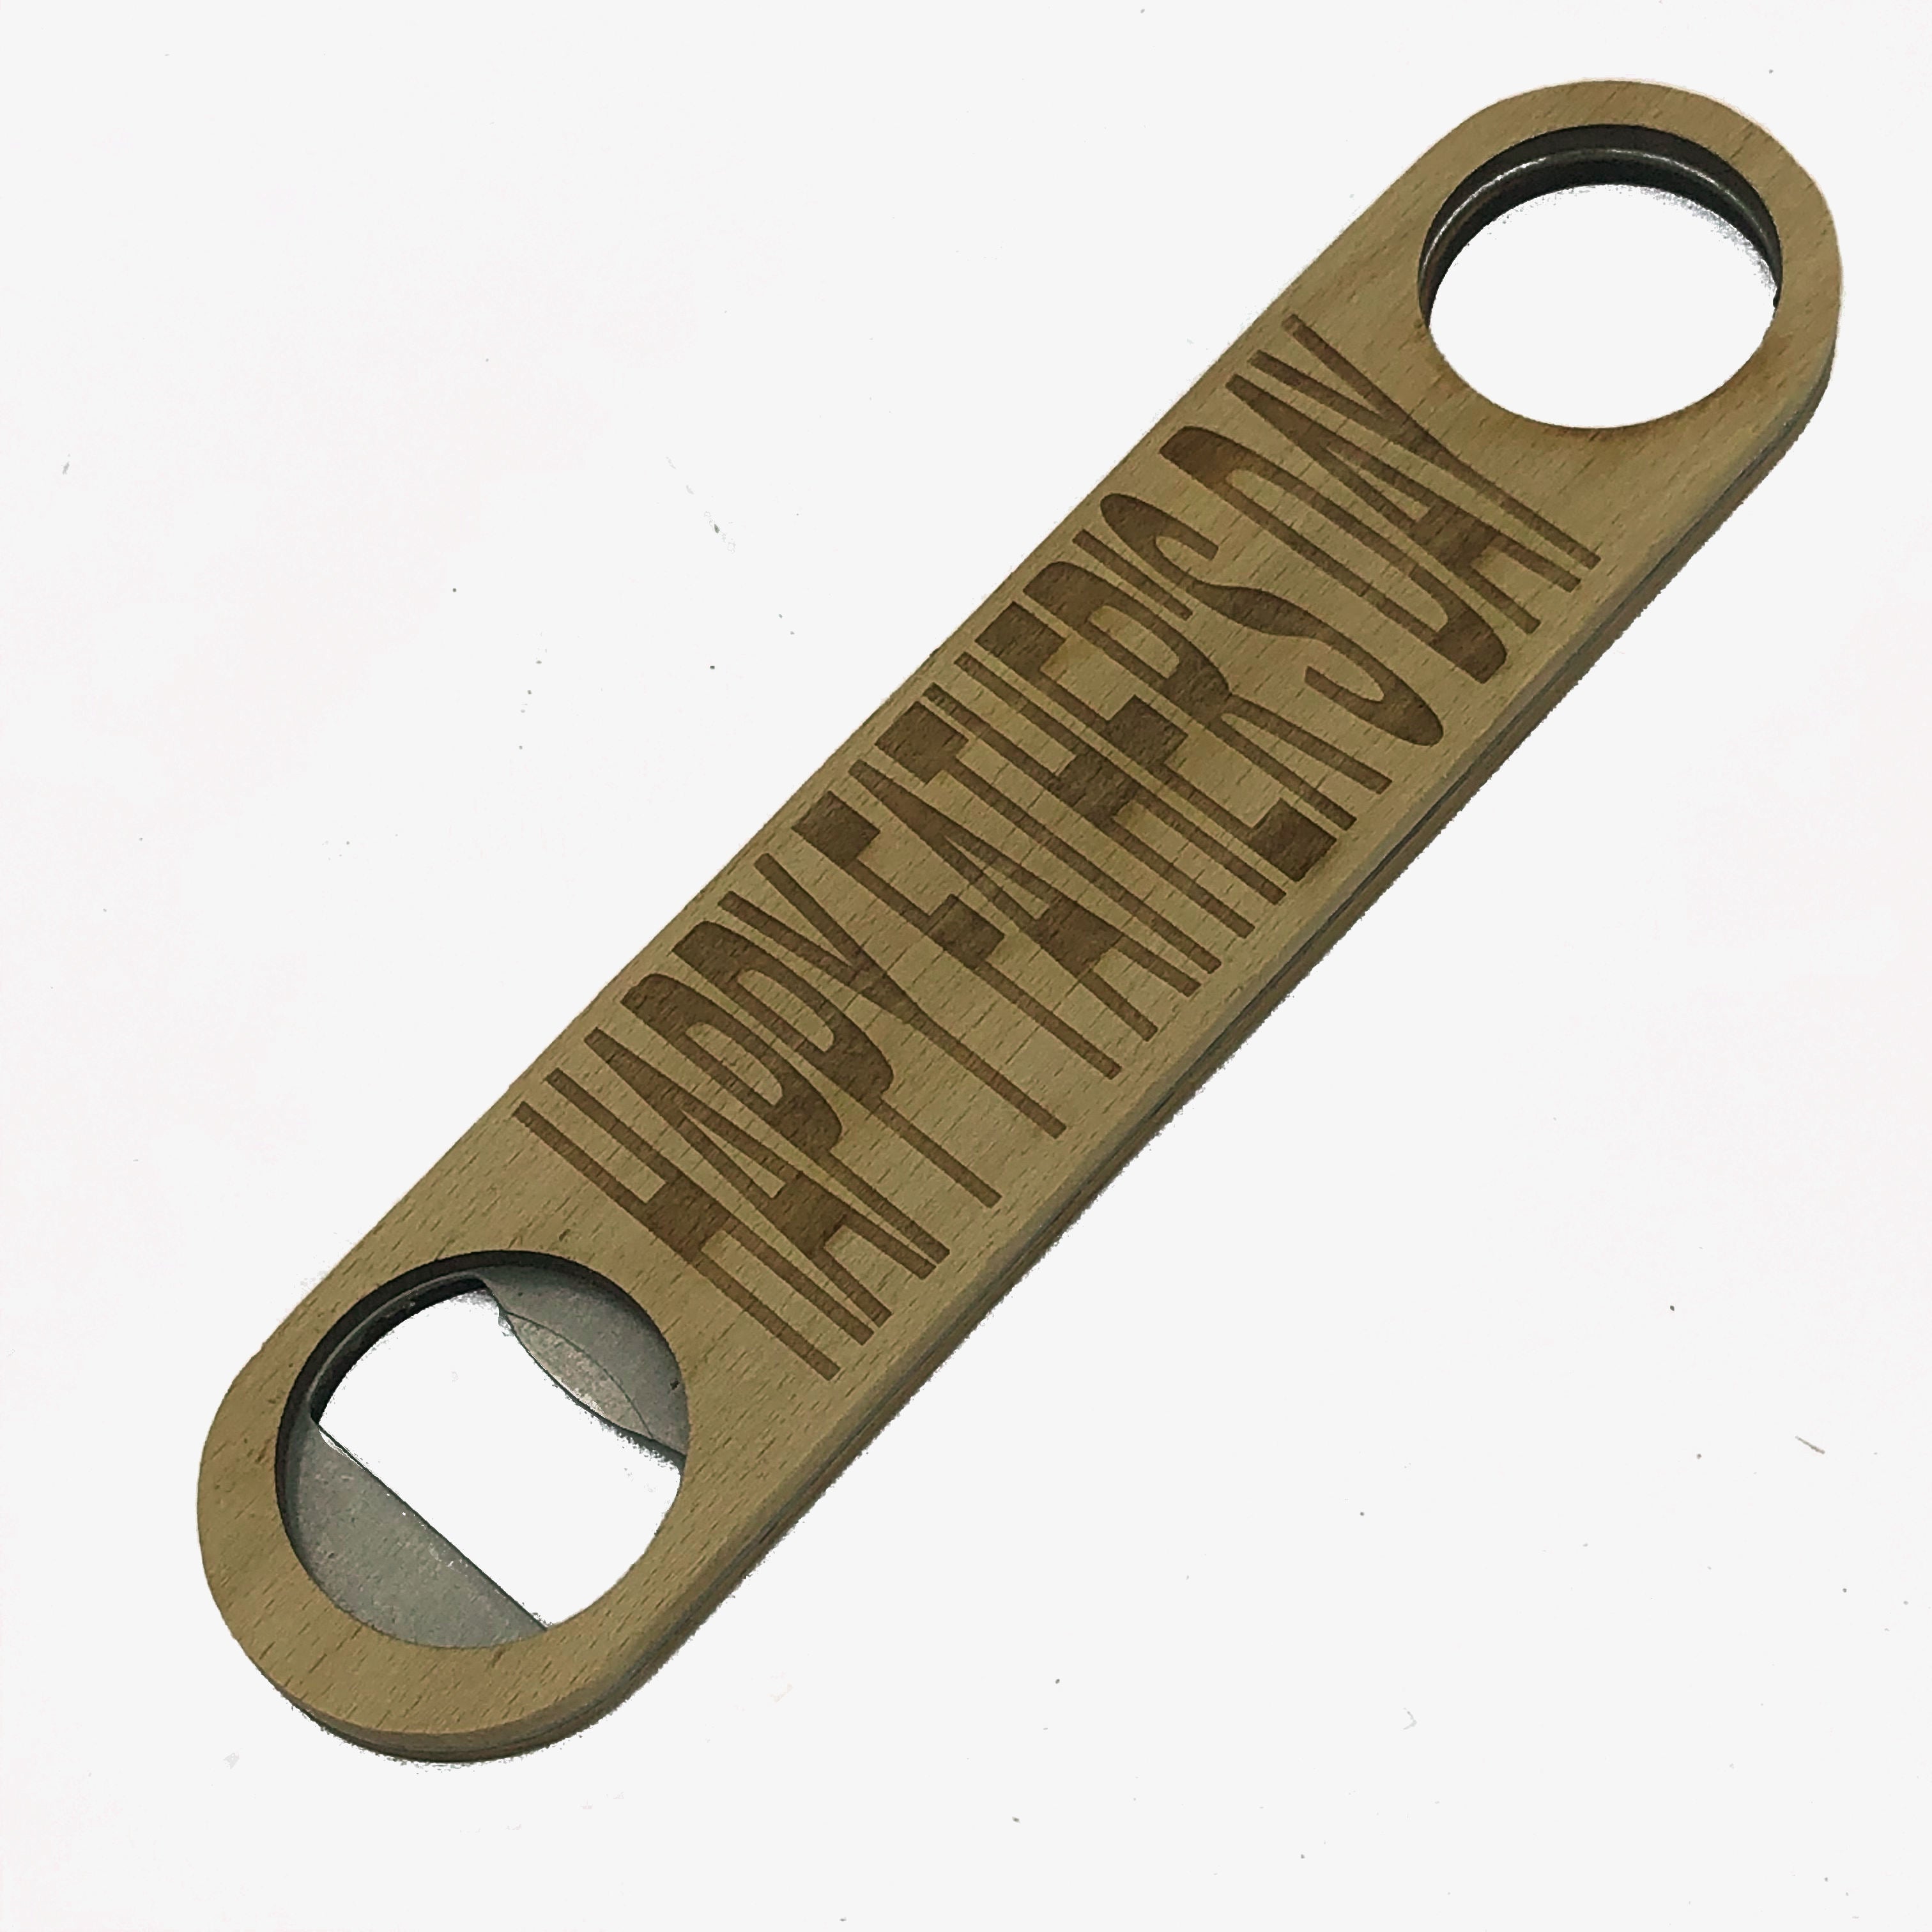 Wooden bottle opener gift for fathers - happy father's day